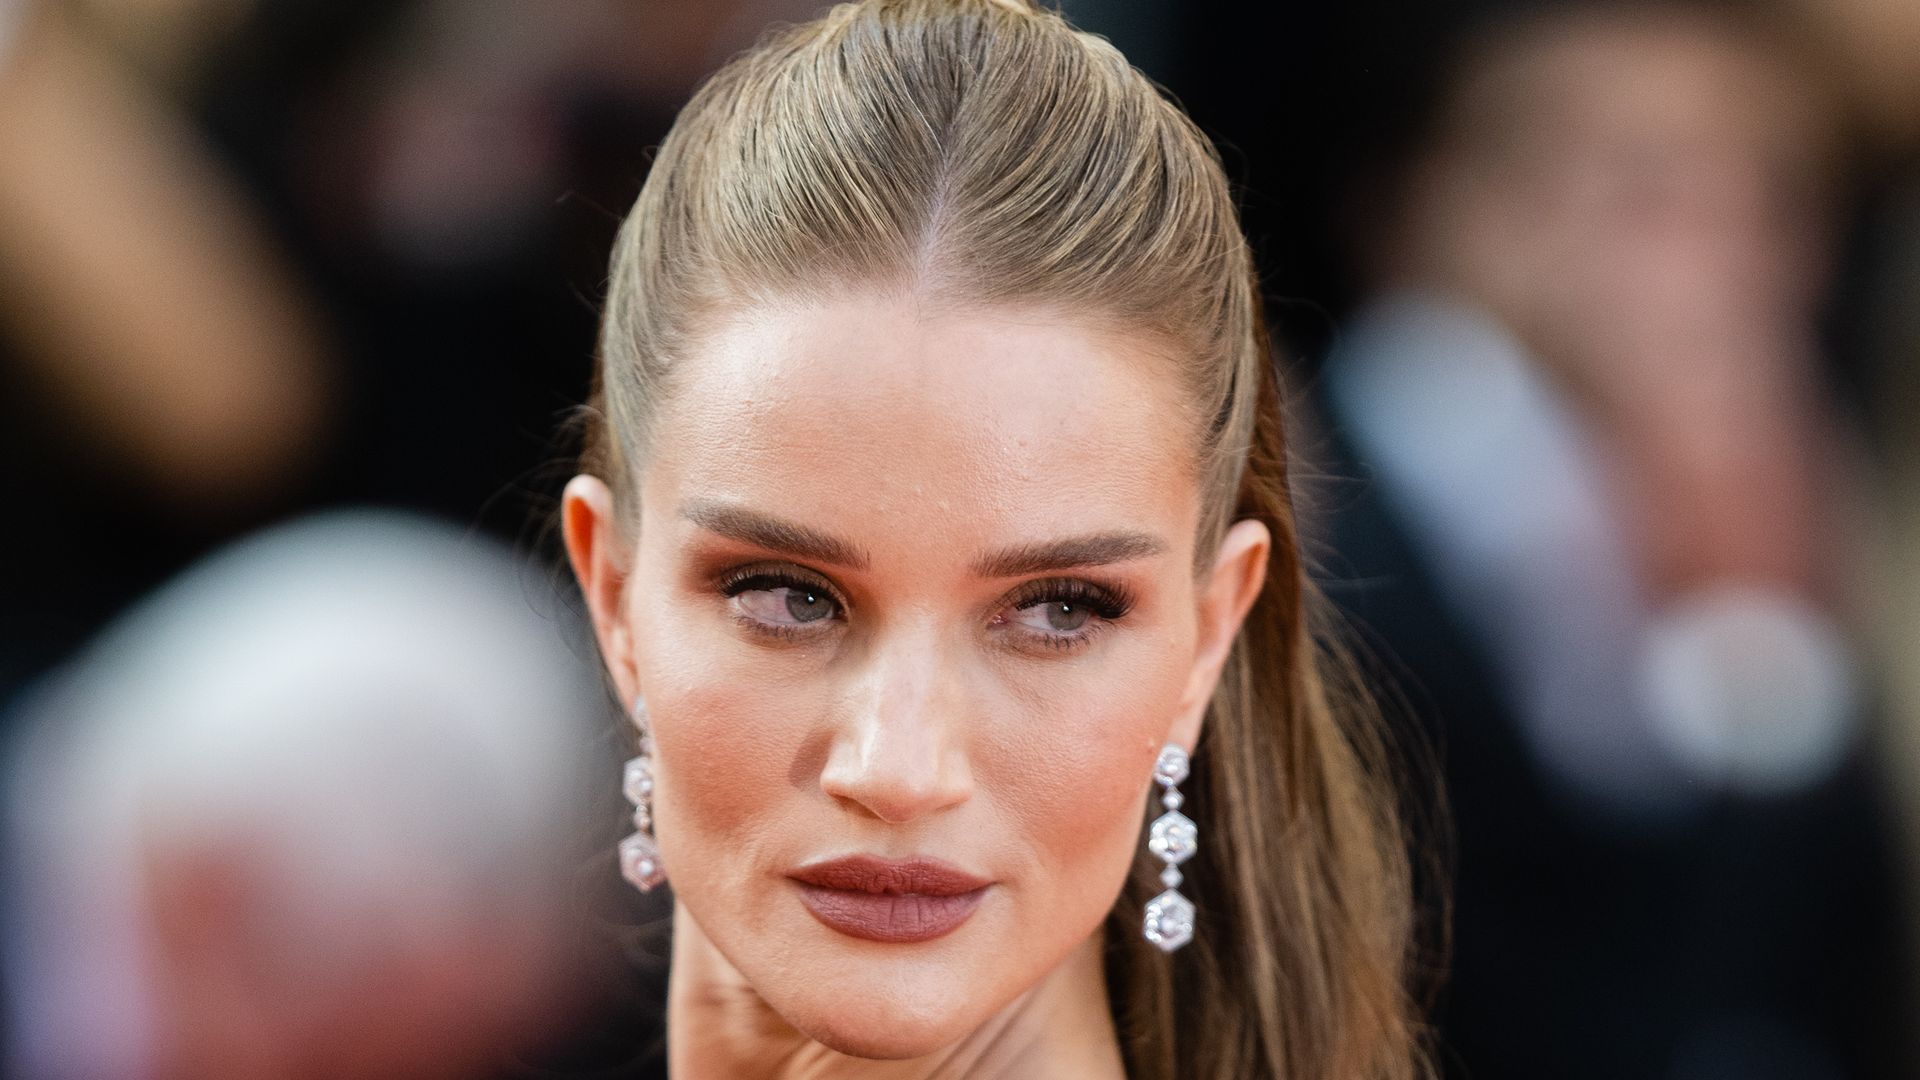 Rosie Huntington-Whiteley's rarely-pictured daughter Bella models ringlets in new photo